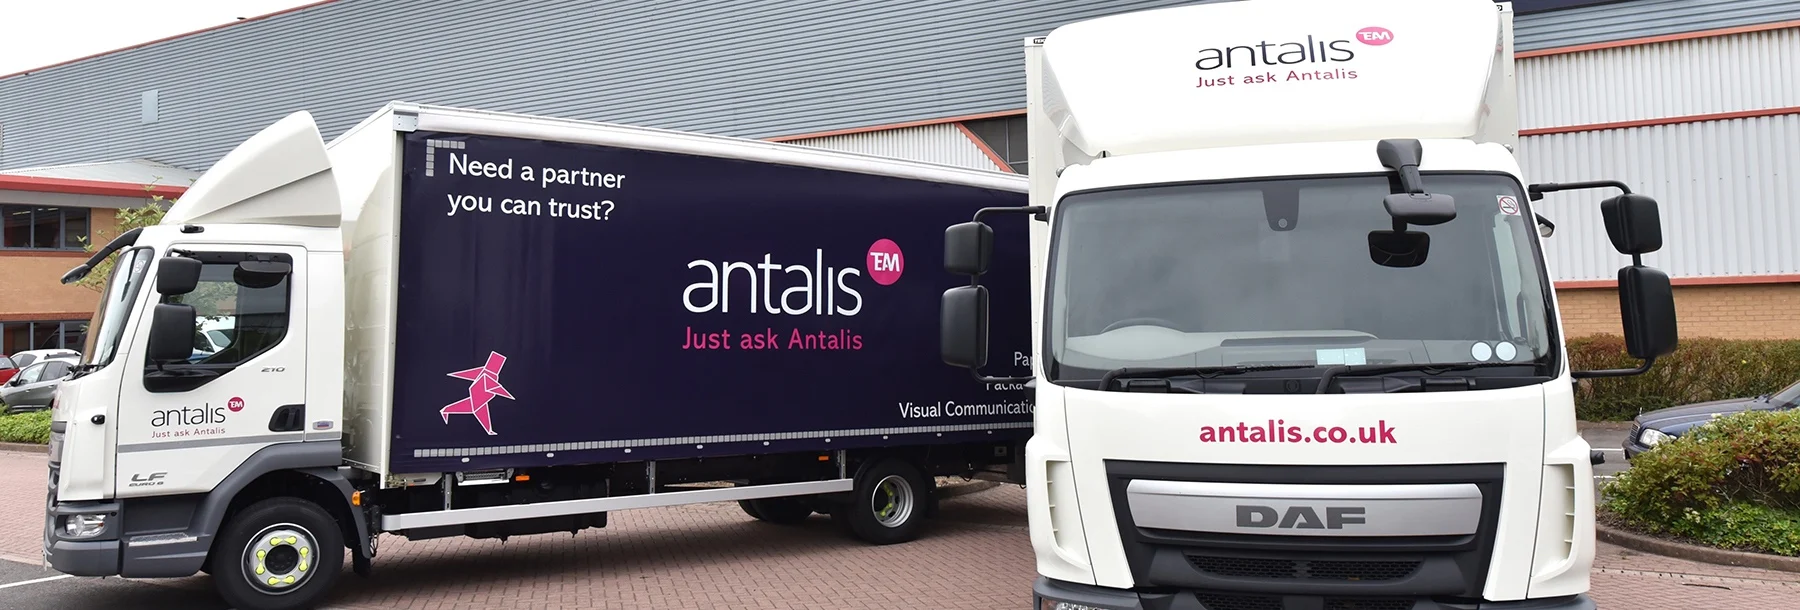 Picture of 2 Antalis Vehicles